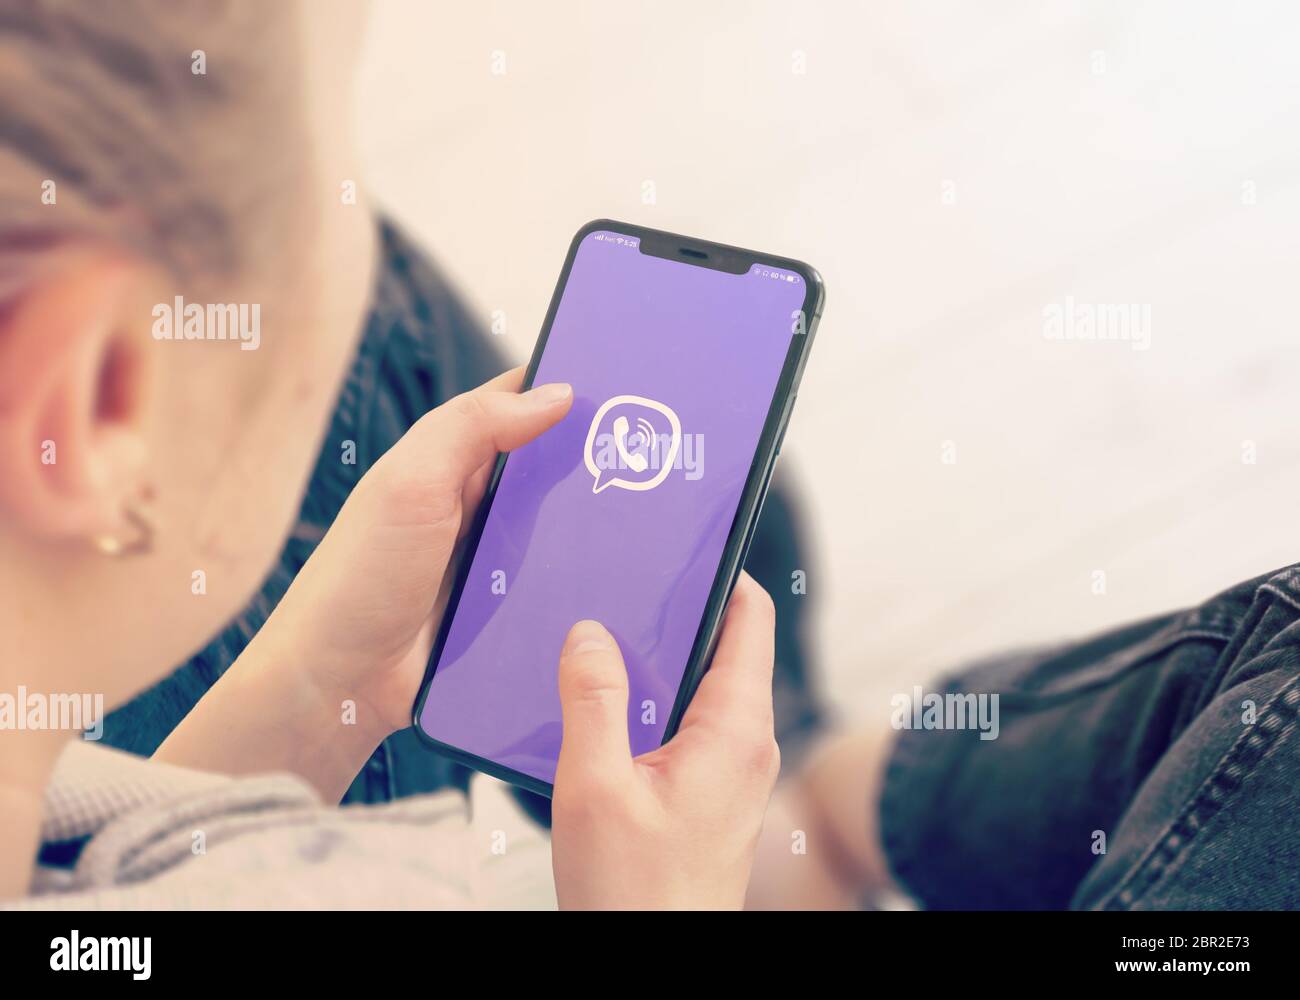 KYIV, UKRAINE-JANUARY, 2020: Viber on Smart Phone Screen. Young Girl Pointing or Texting Viber on Smart Phone During a Pandemic Self-Isolation and Coronavirus Prevention. Stock Photo